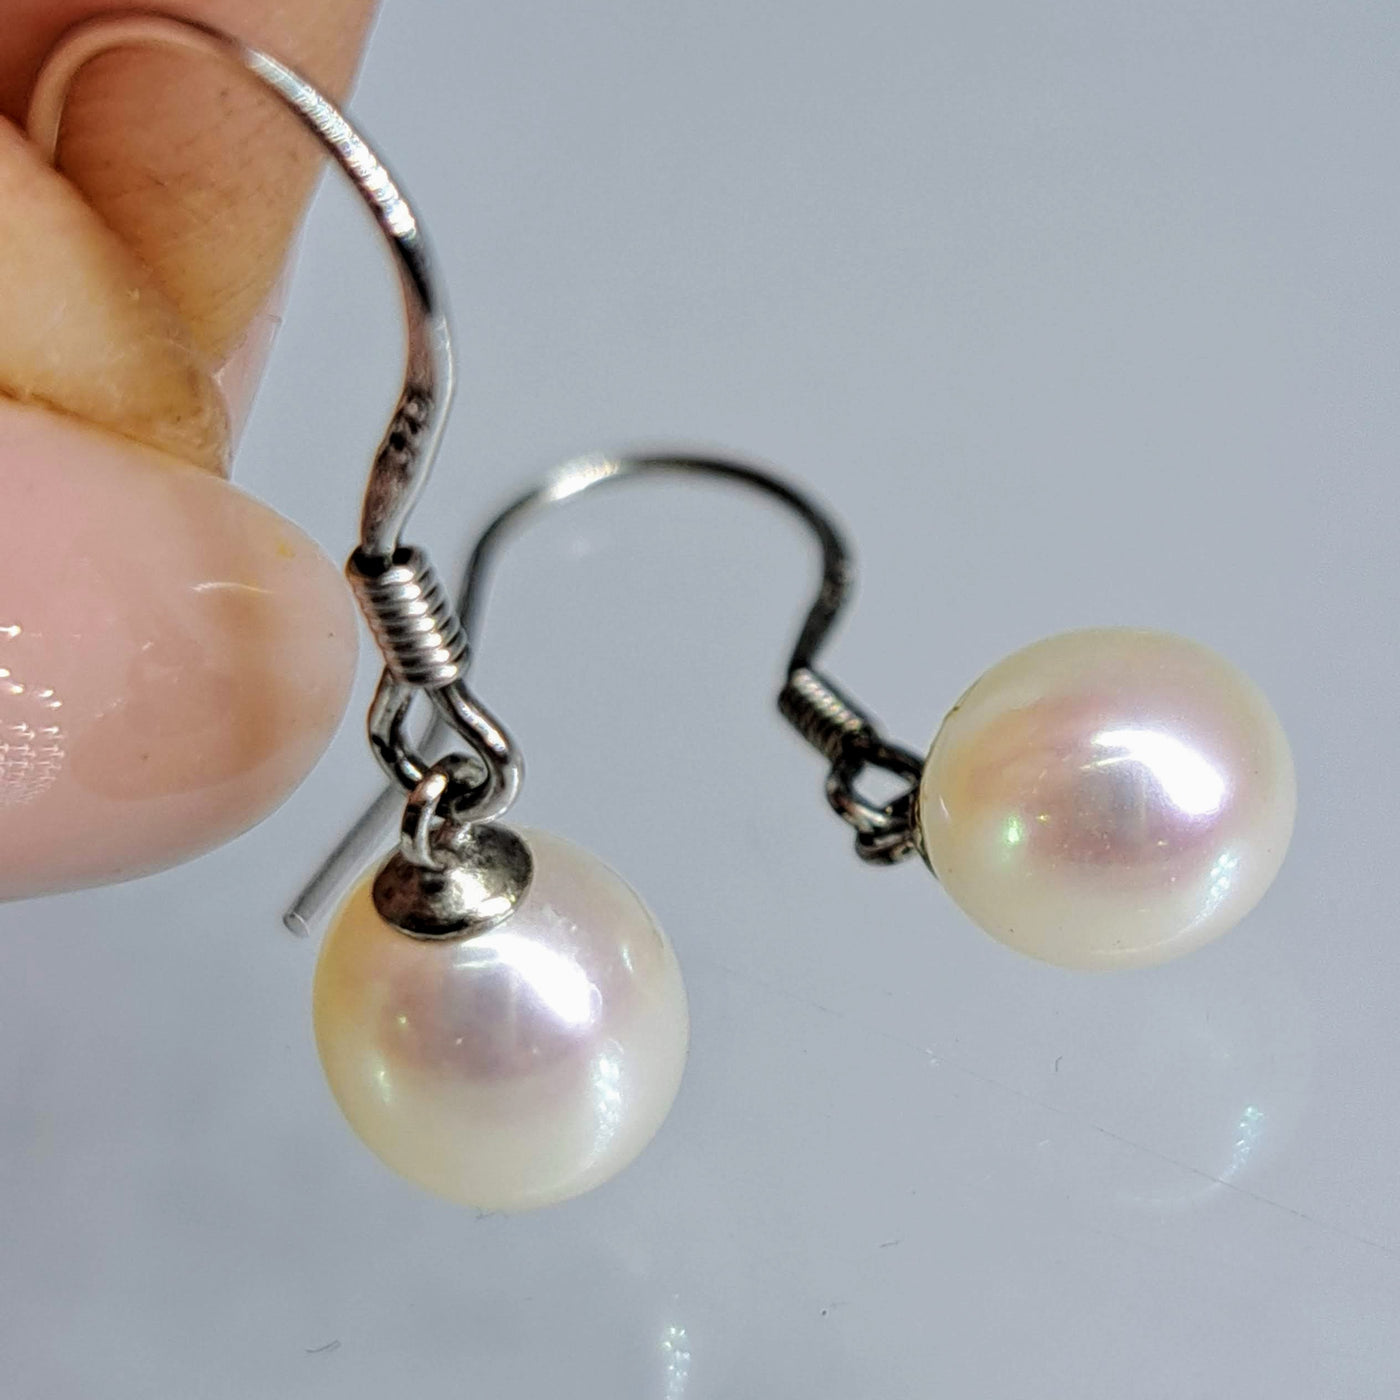 "Petite Pearl Drops" Appx. .75" Earrings - Pink, White, Or Peacock Pearls, Sterling